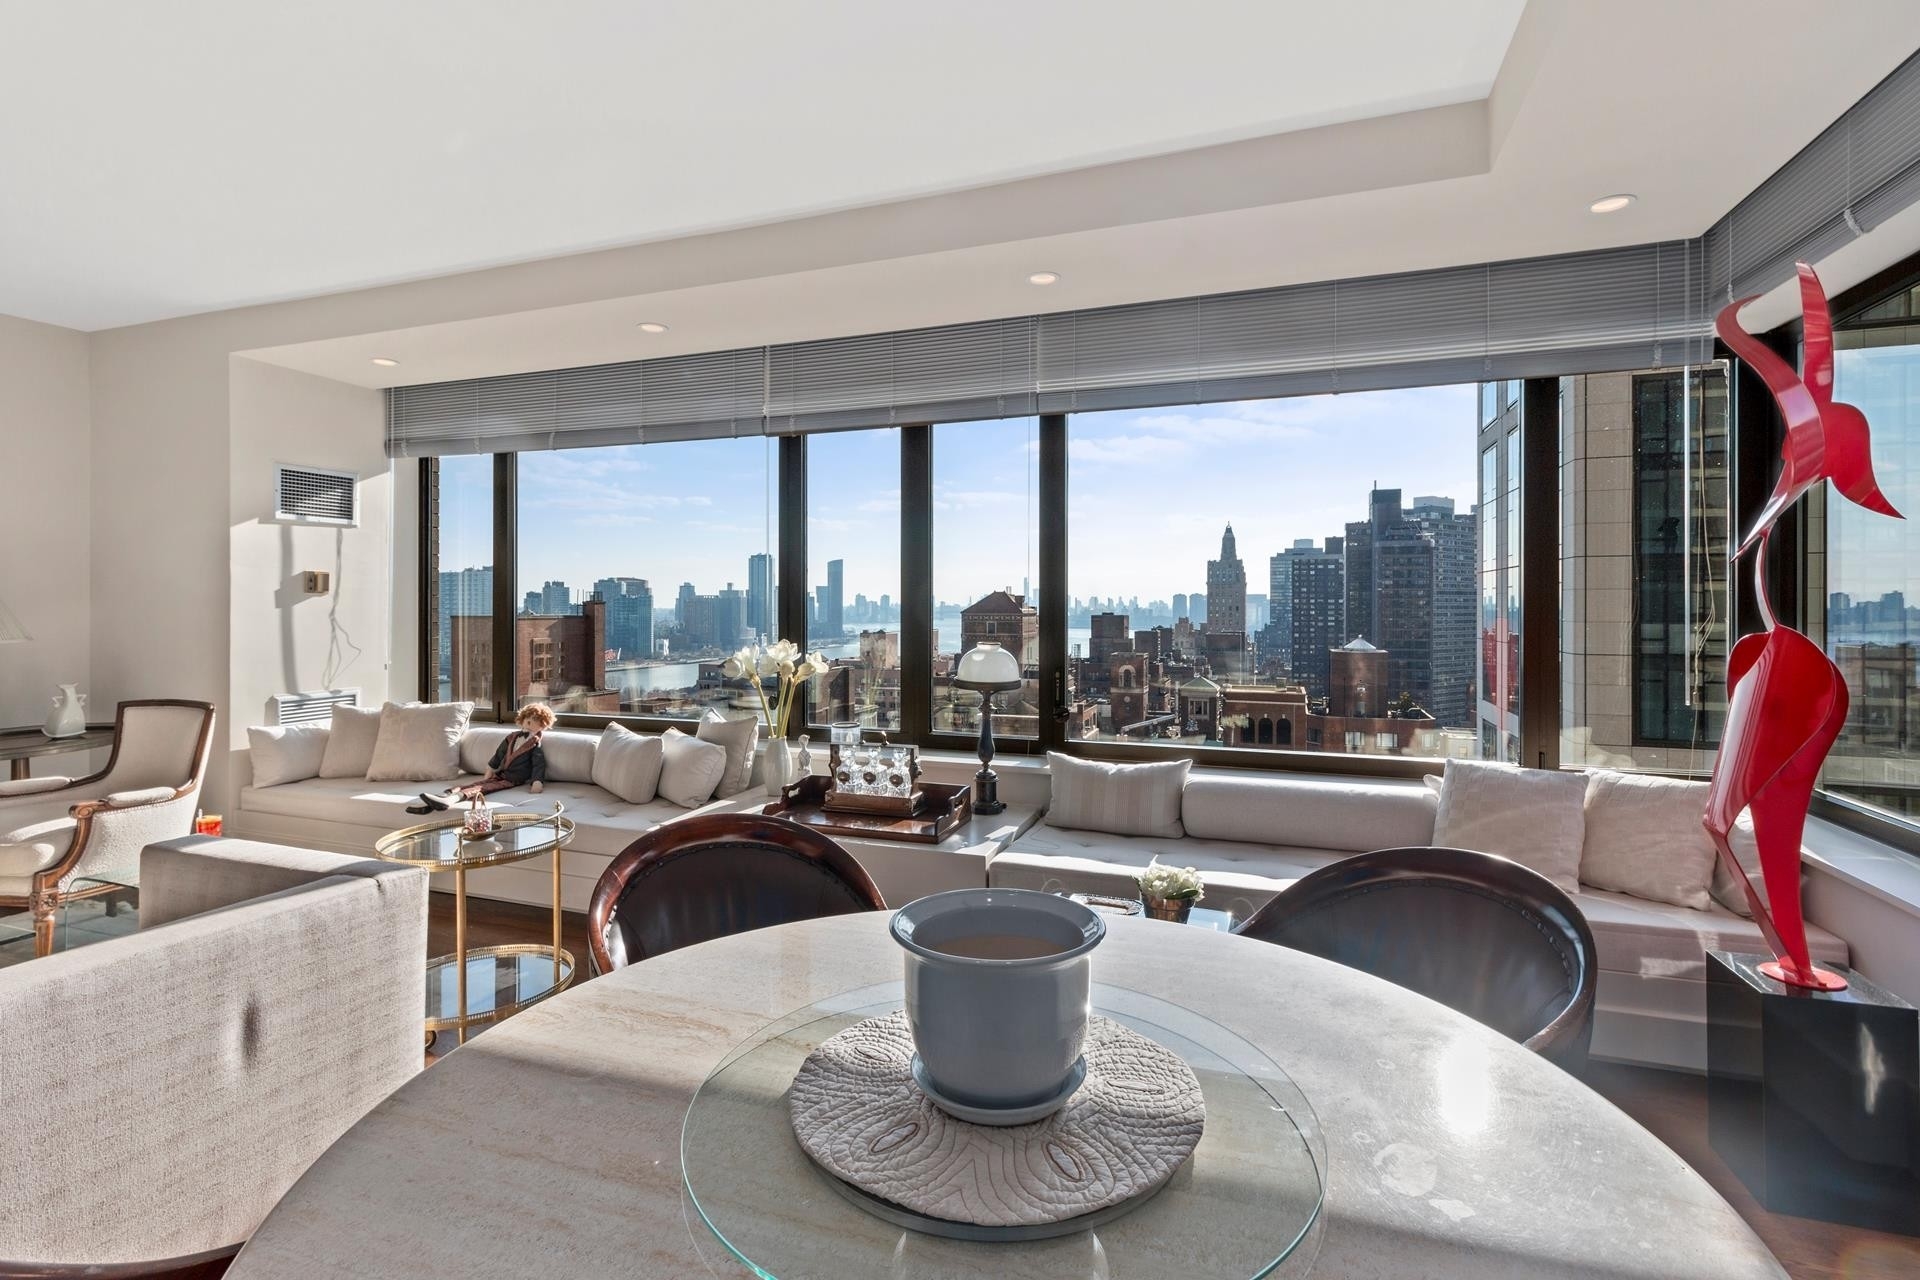 Co-op Properties for Sale at The Sovereign, 425 E 58TH ST, 24G Sutton Place, New York, NY 10022